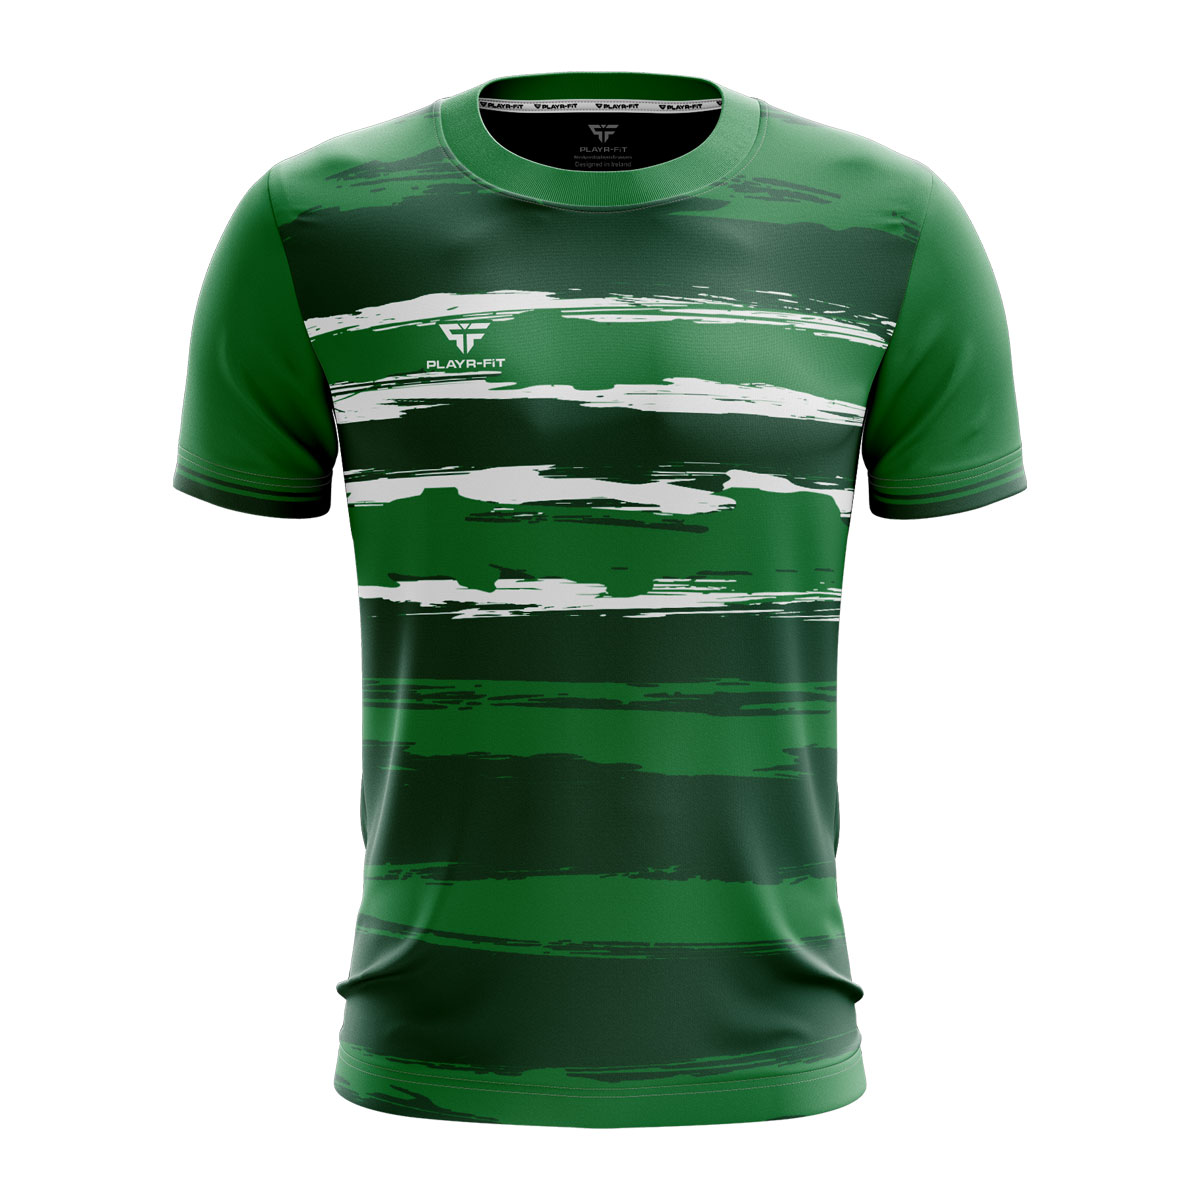 Education Sublimated Jersey - PLAYR-FIT - Ireland & UK